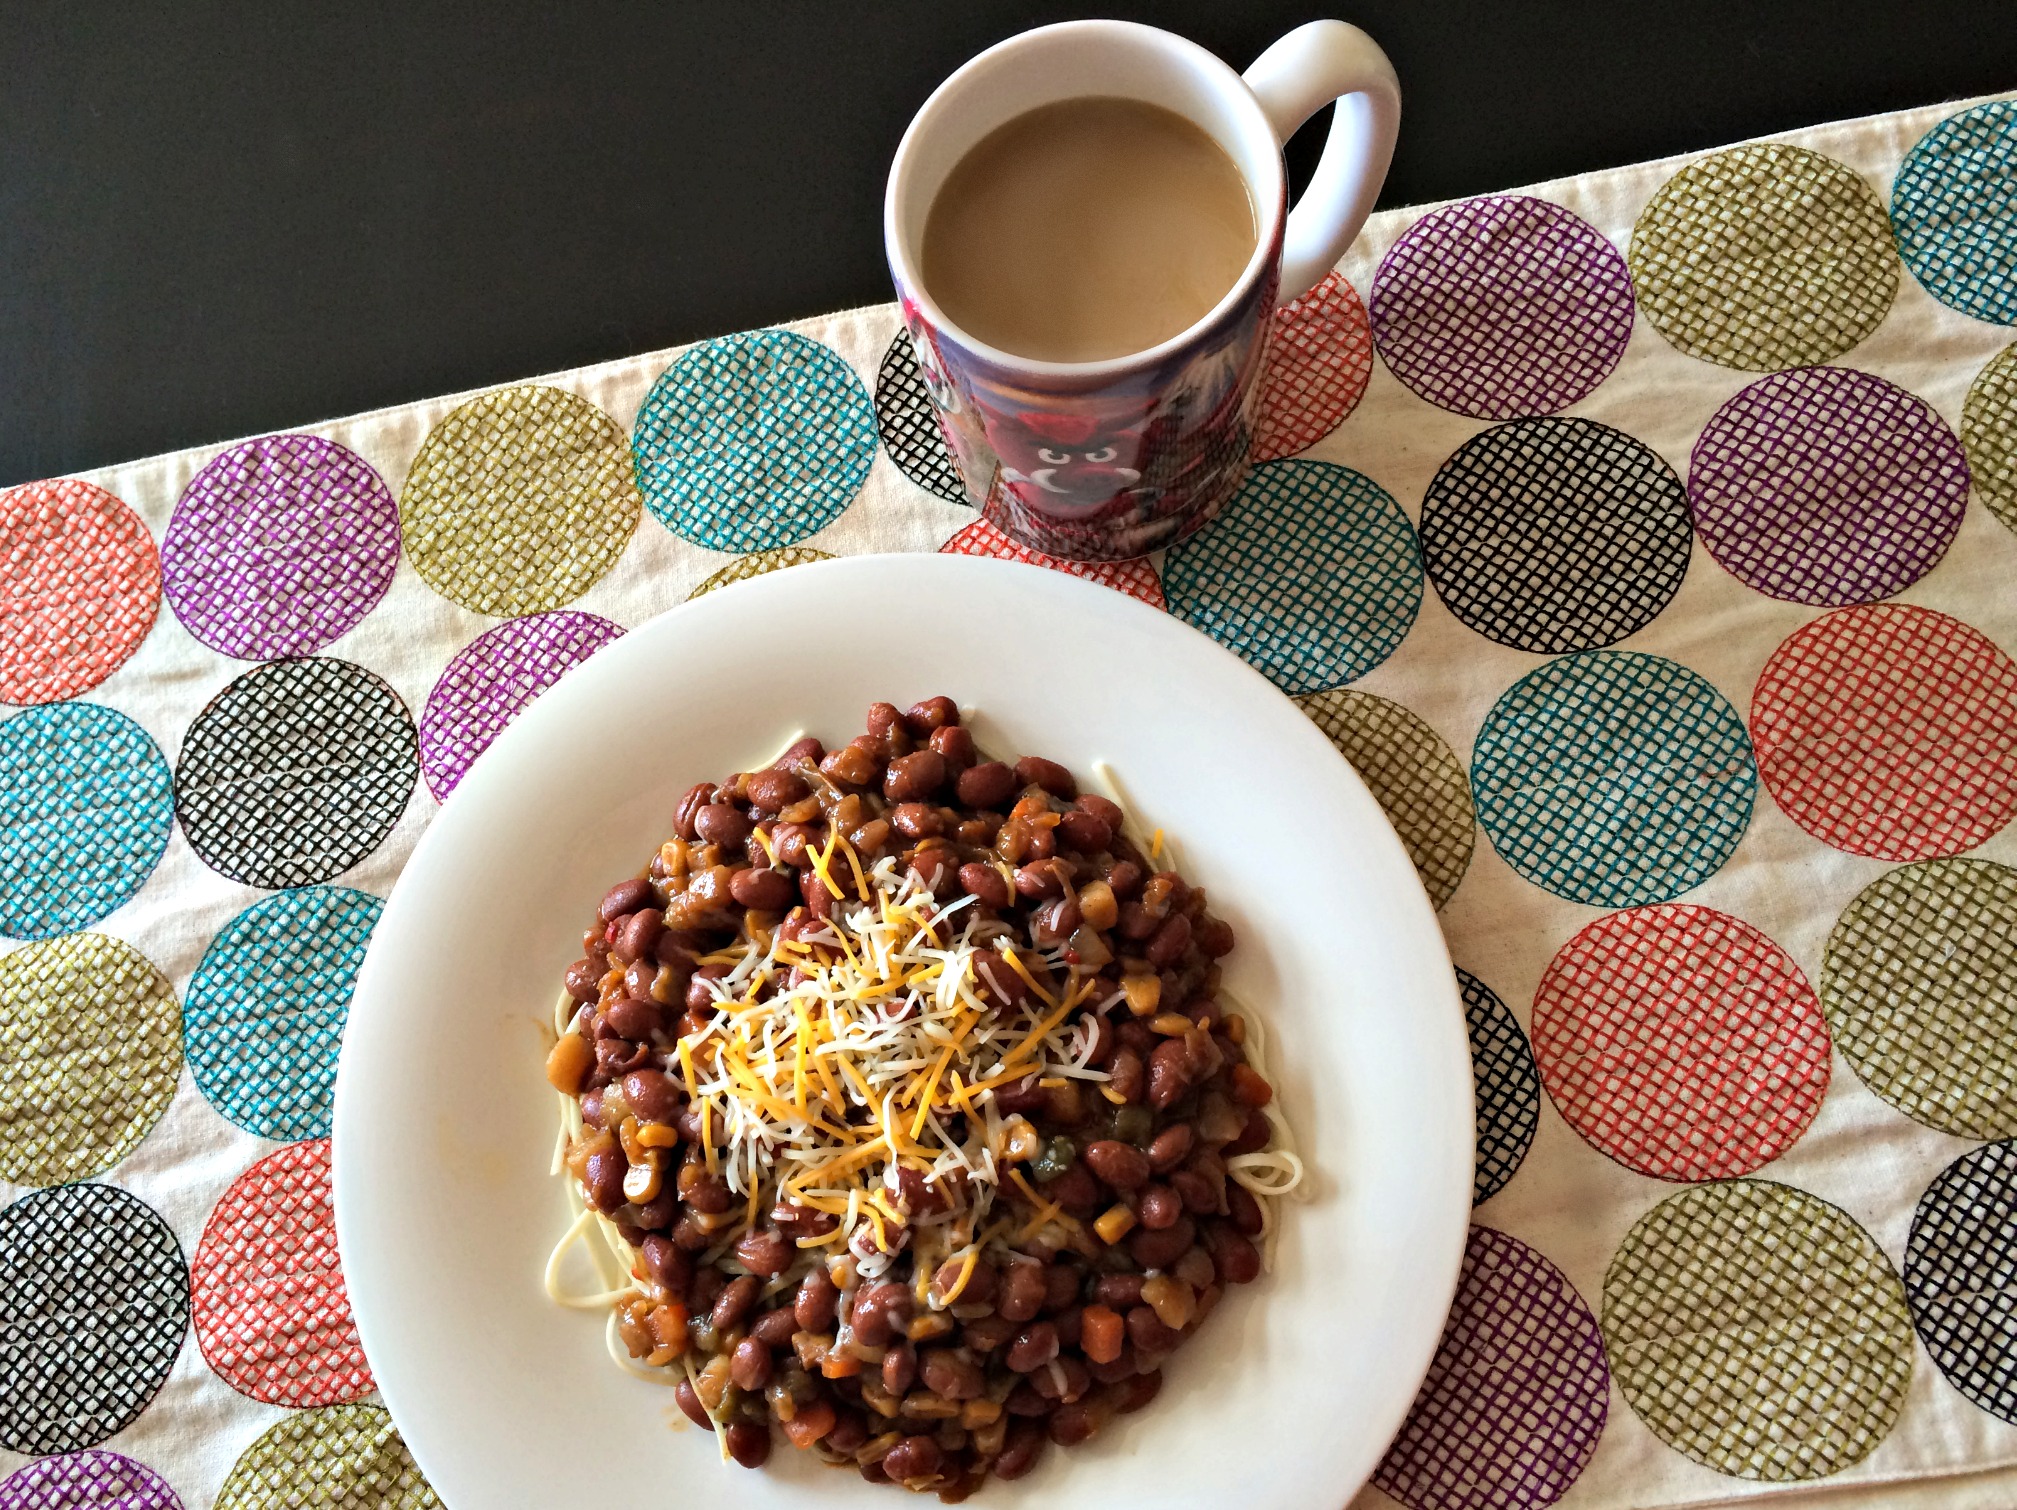 amy's chili over noodles and coffee